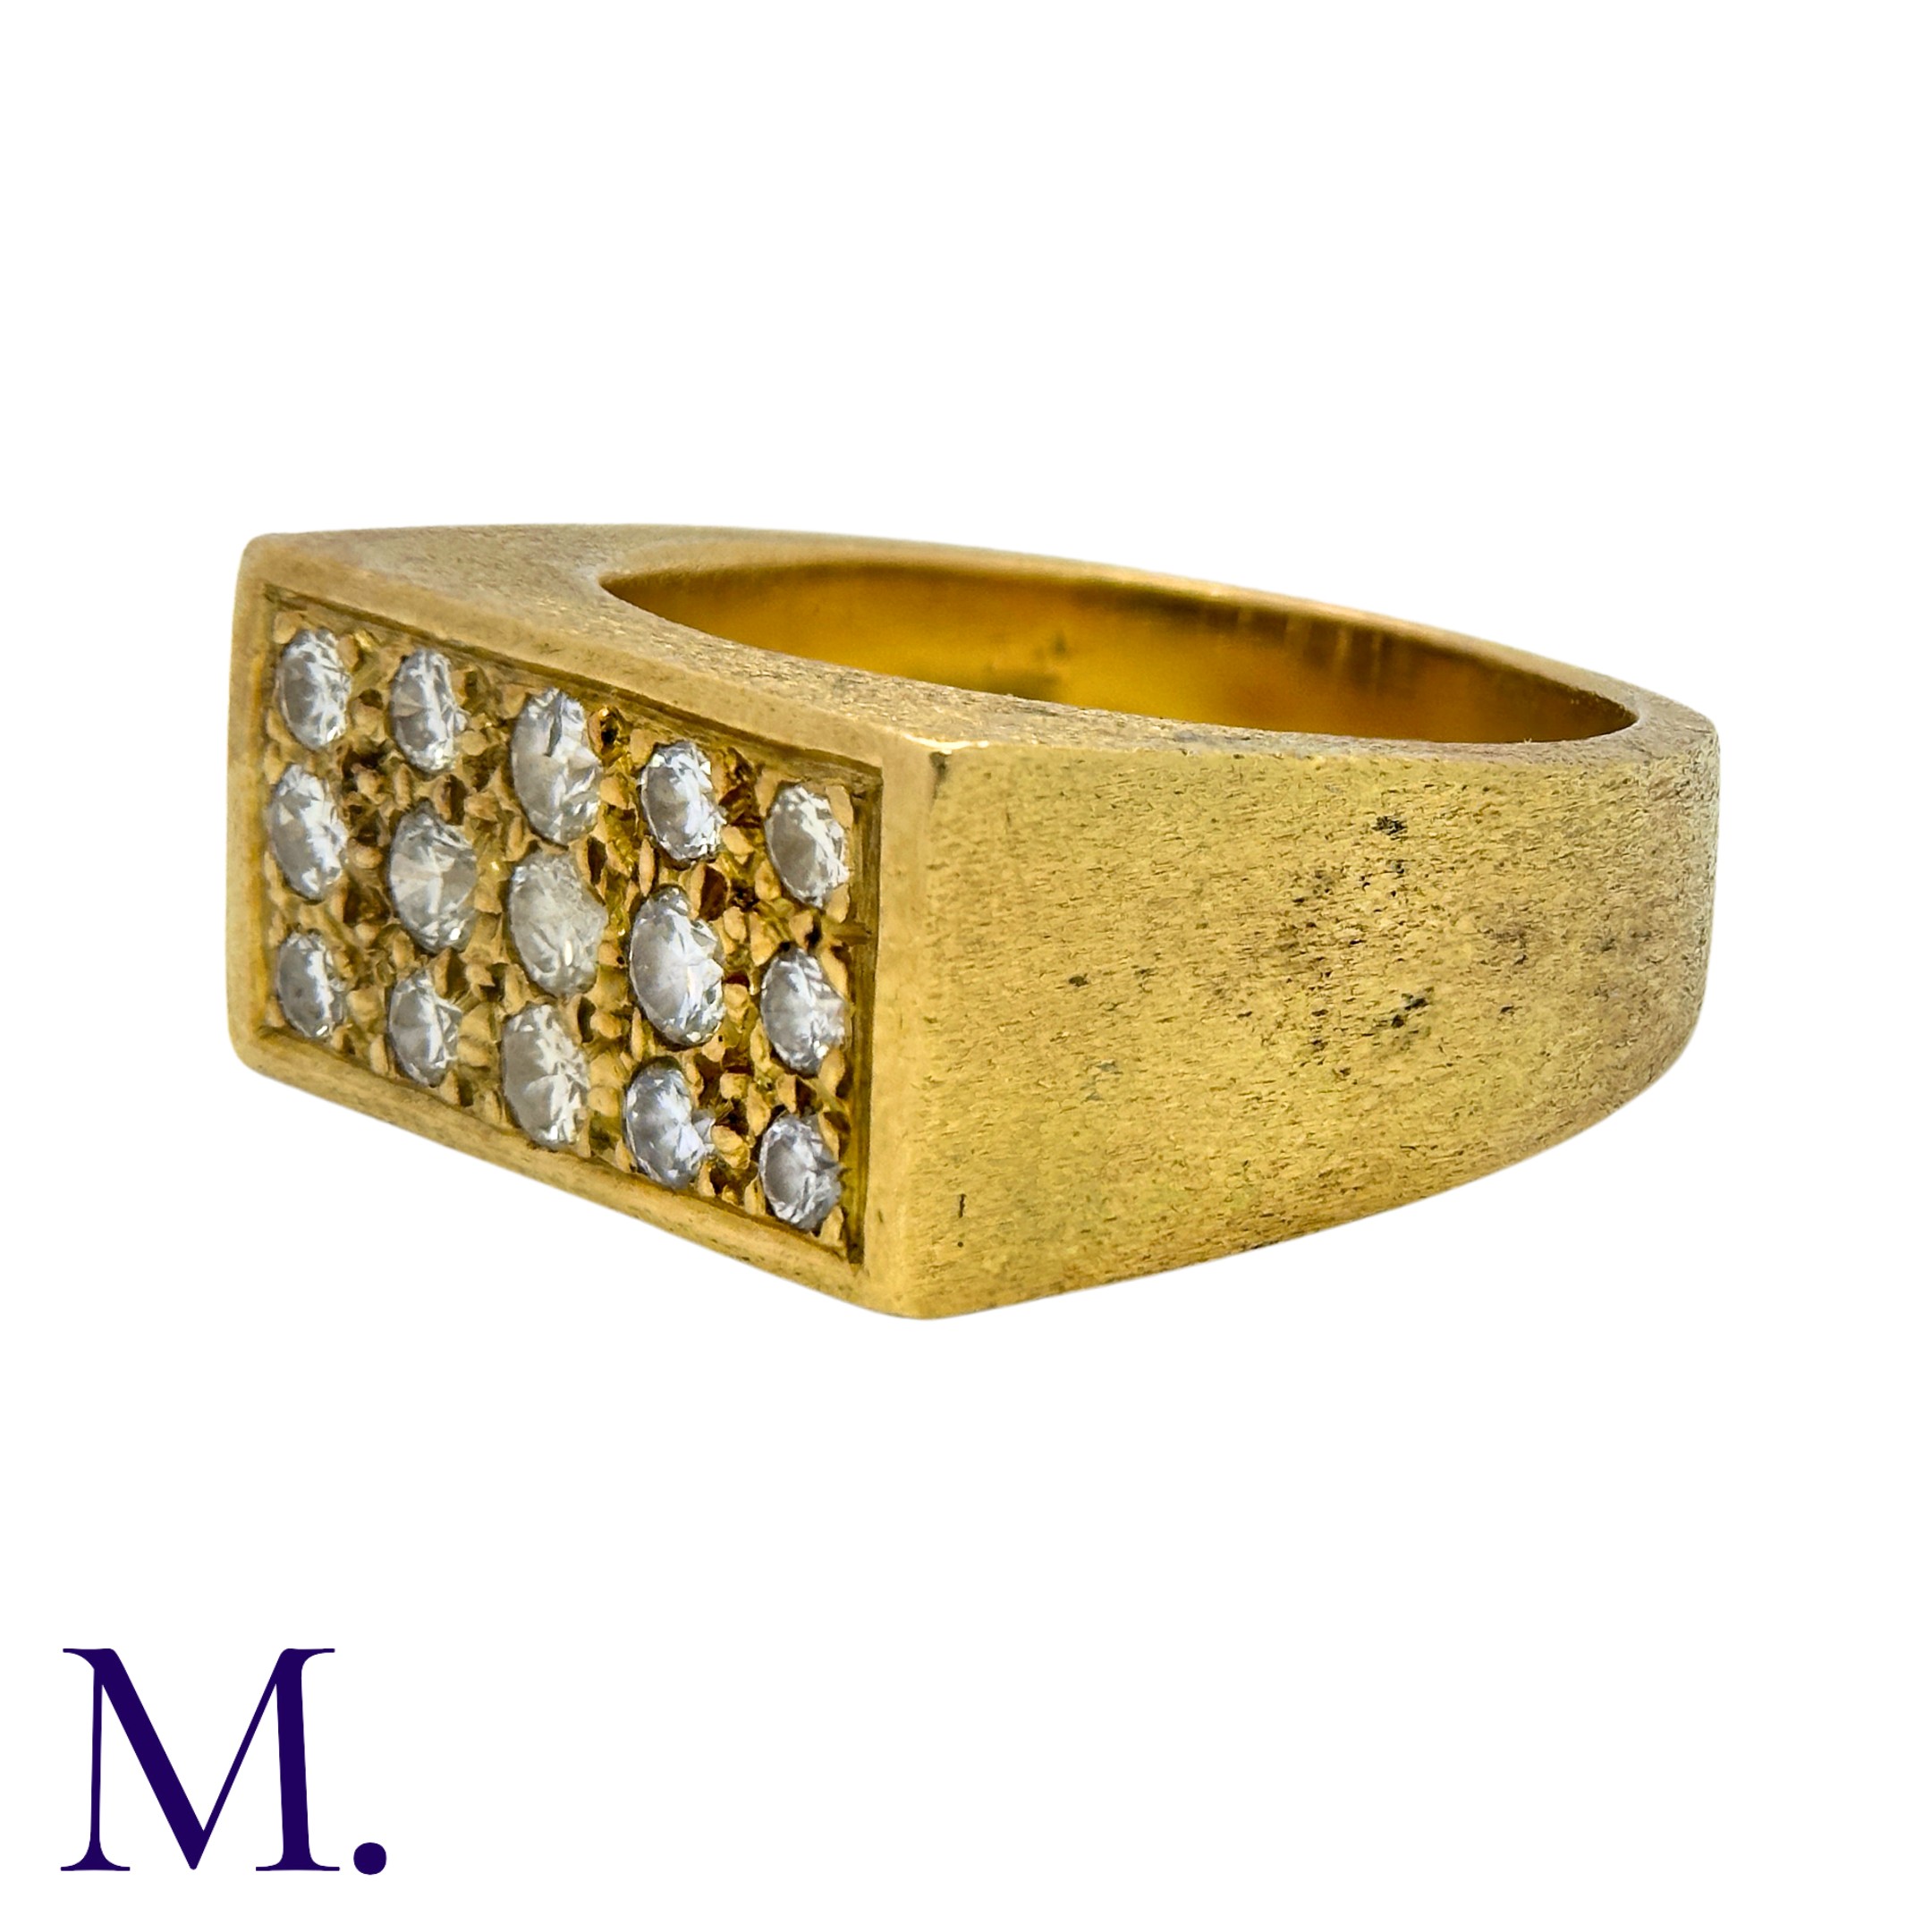 A Diamond-Set Signet Ring in 18K yellow gold, with textured, matt-finish band, set with three rows - Image 3 of 5